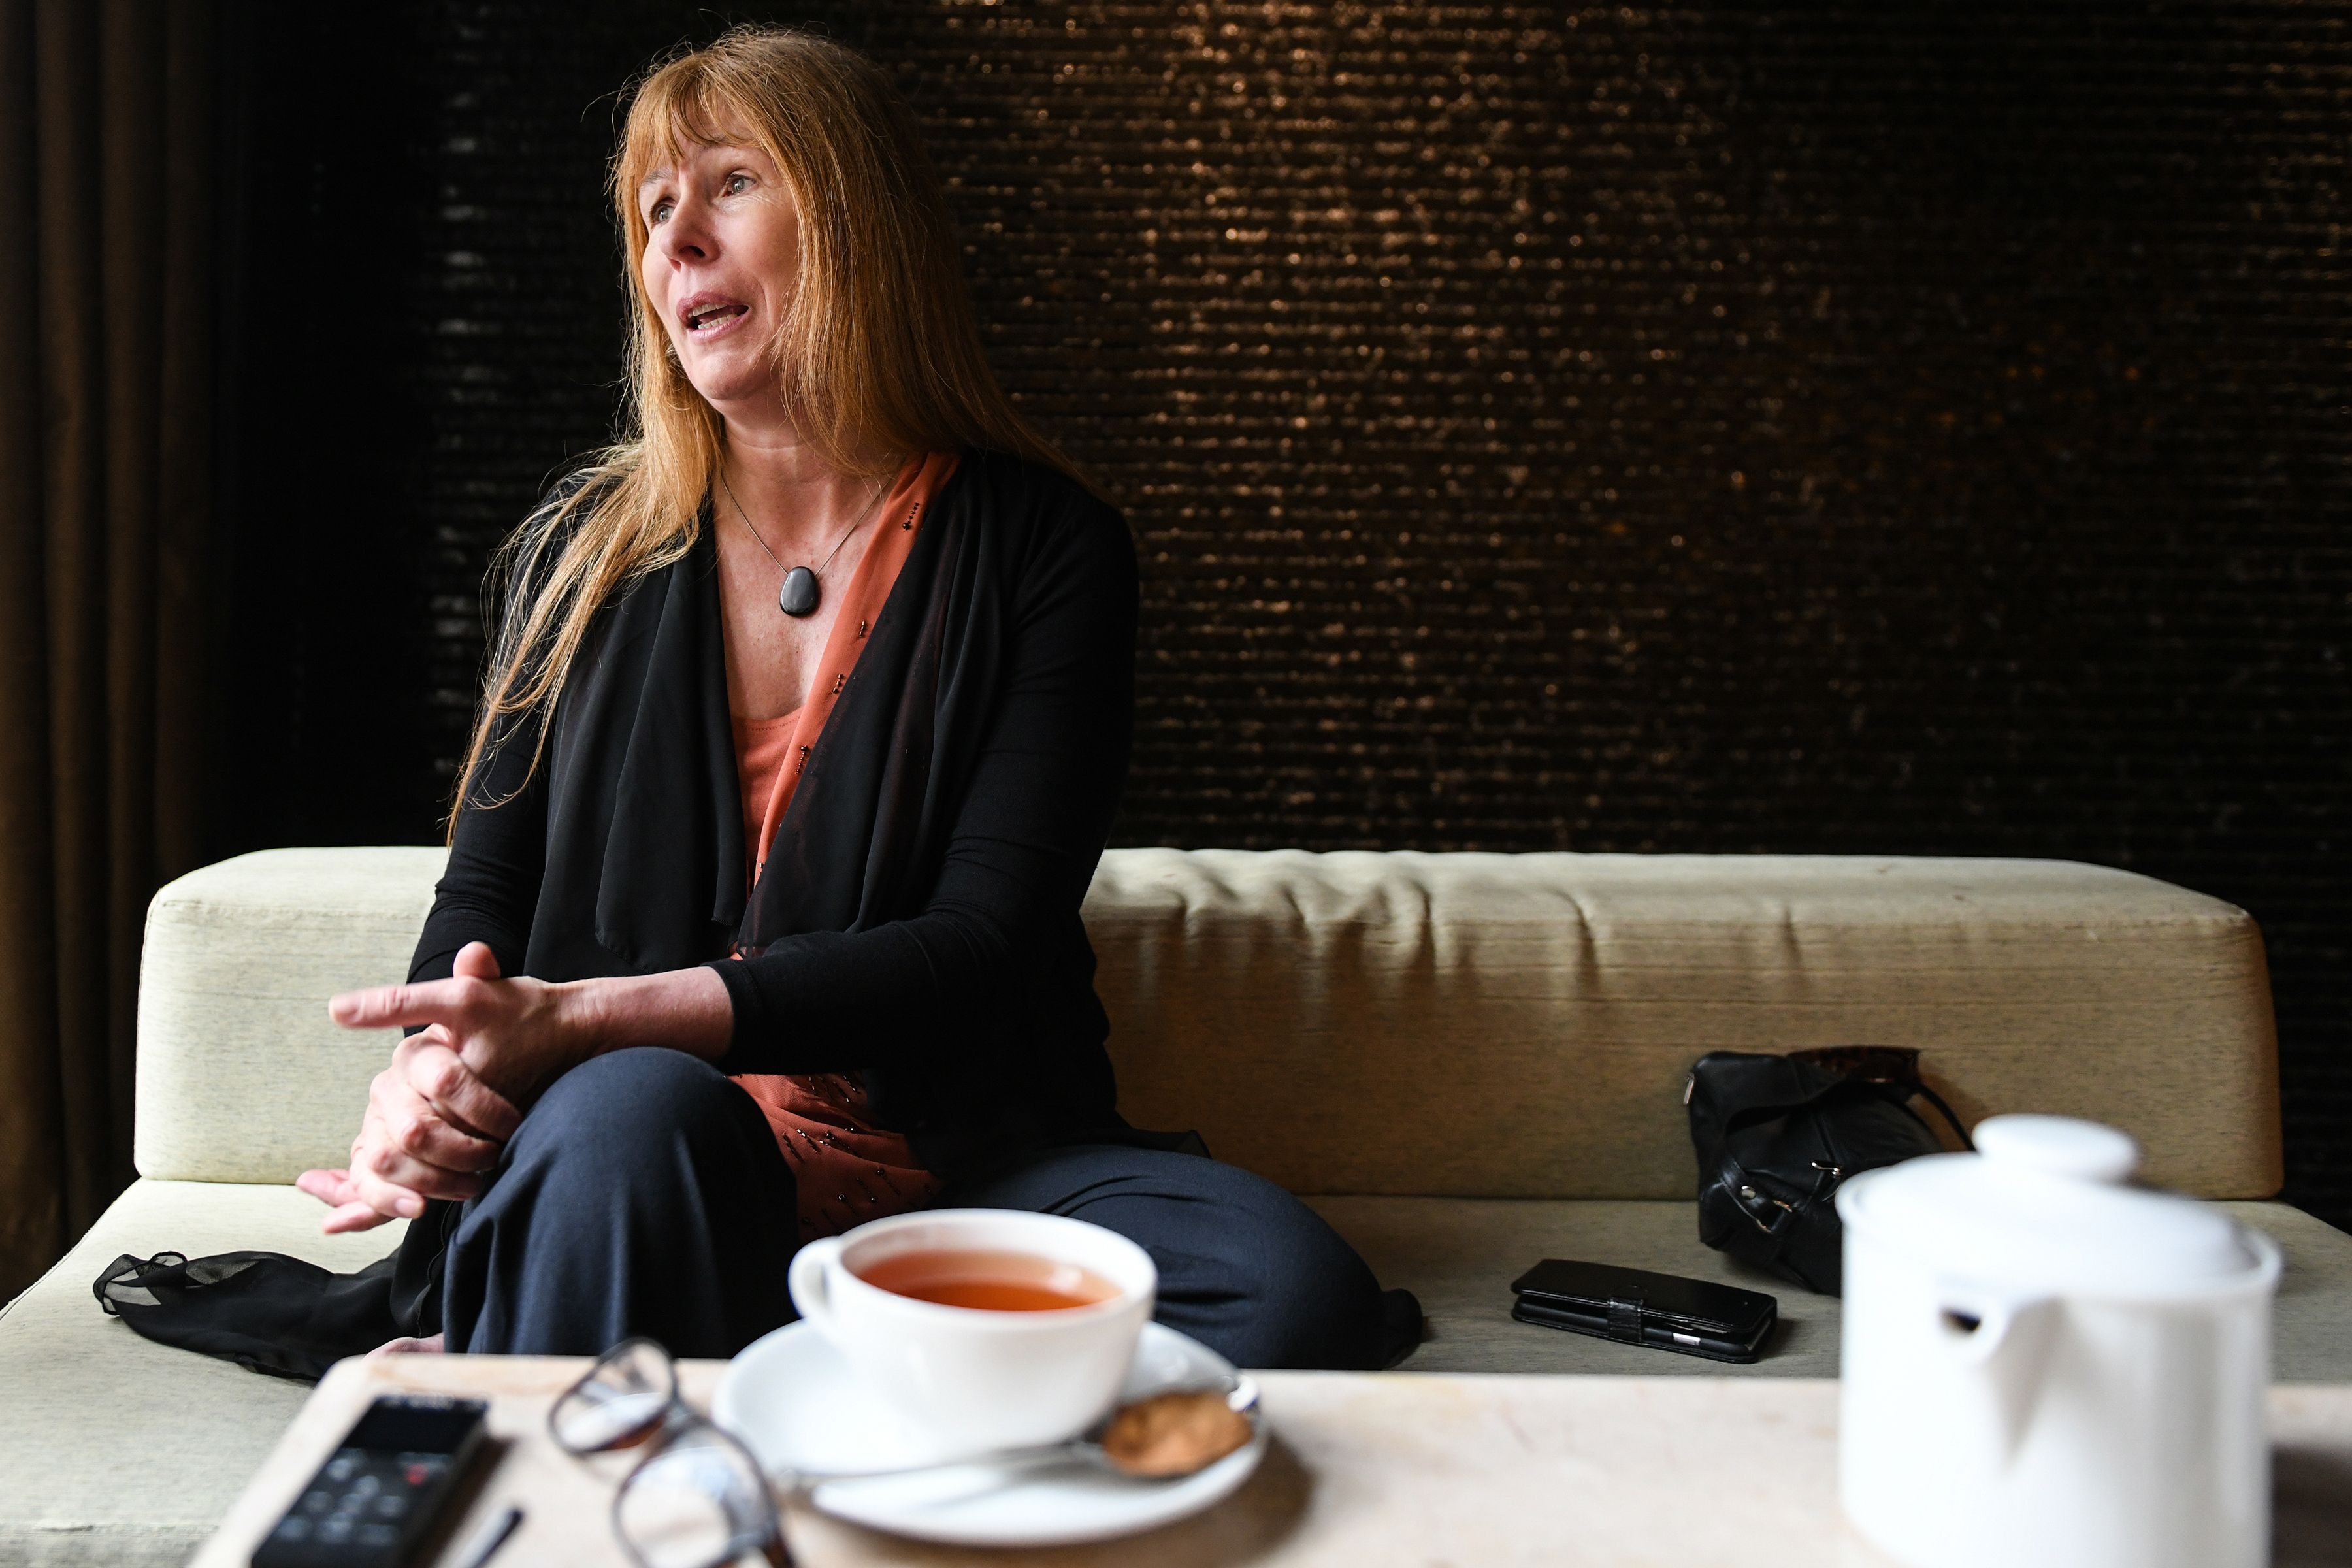 British journalist Clare Rewcastle Brown speaks during an interview in Kuala Lumpur, Malaysia on May 20, 2018. (Mohd Rasfan—AFP/Getty Images)